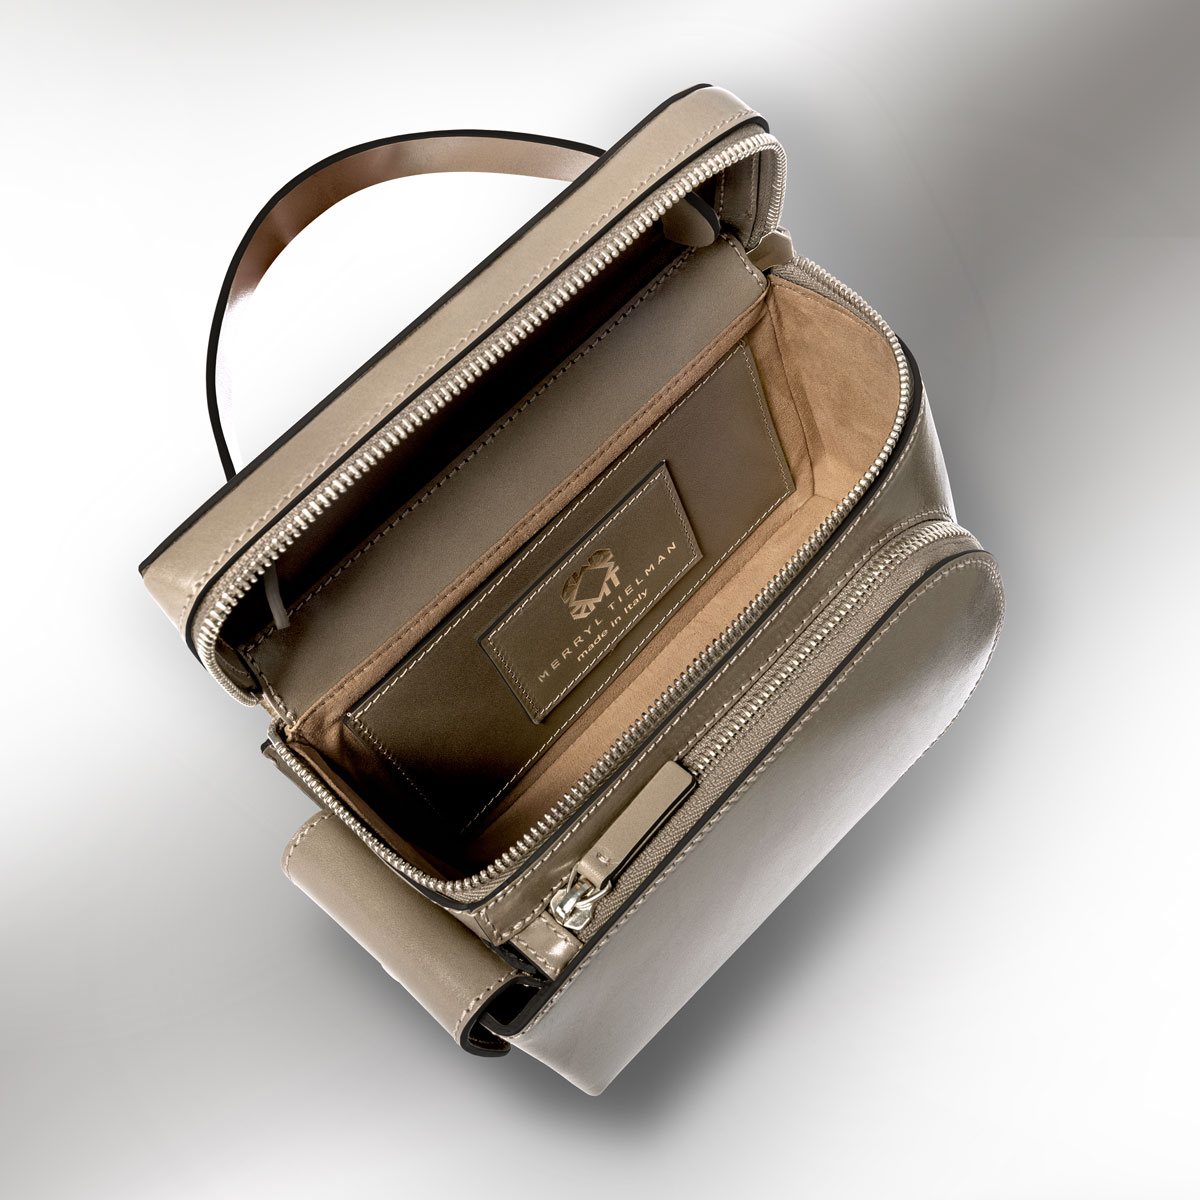 Merryl Tielman, Esther bag: a compact bag, to be to worn over the shoulder or crossbody, or carried by hand for a vanity style look. Made in Italy, vegetable tanned cow leather, colour gray.